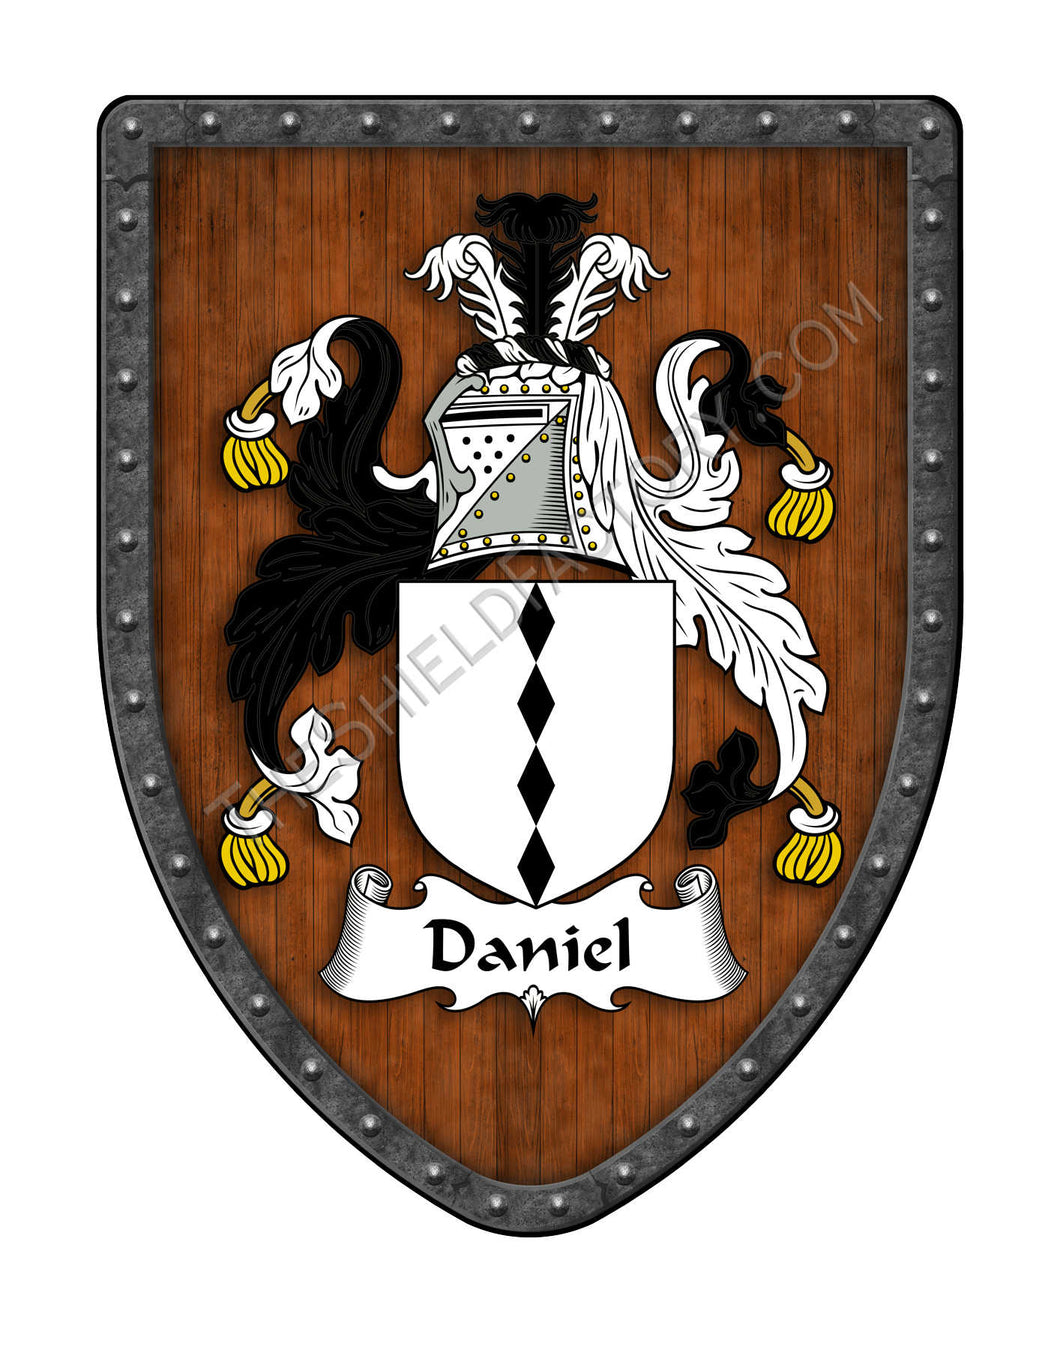 Daniel Coat of Arms Shield Family Crest